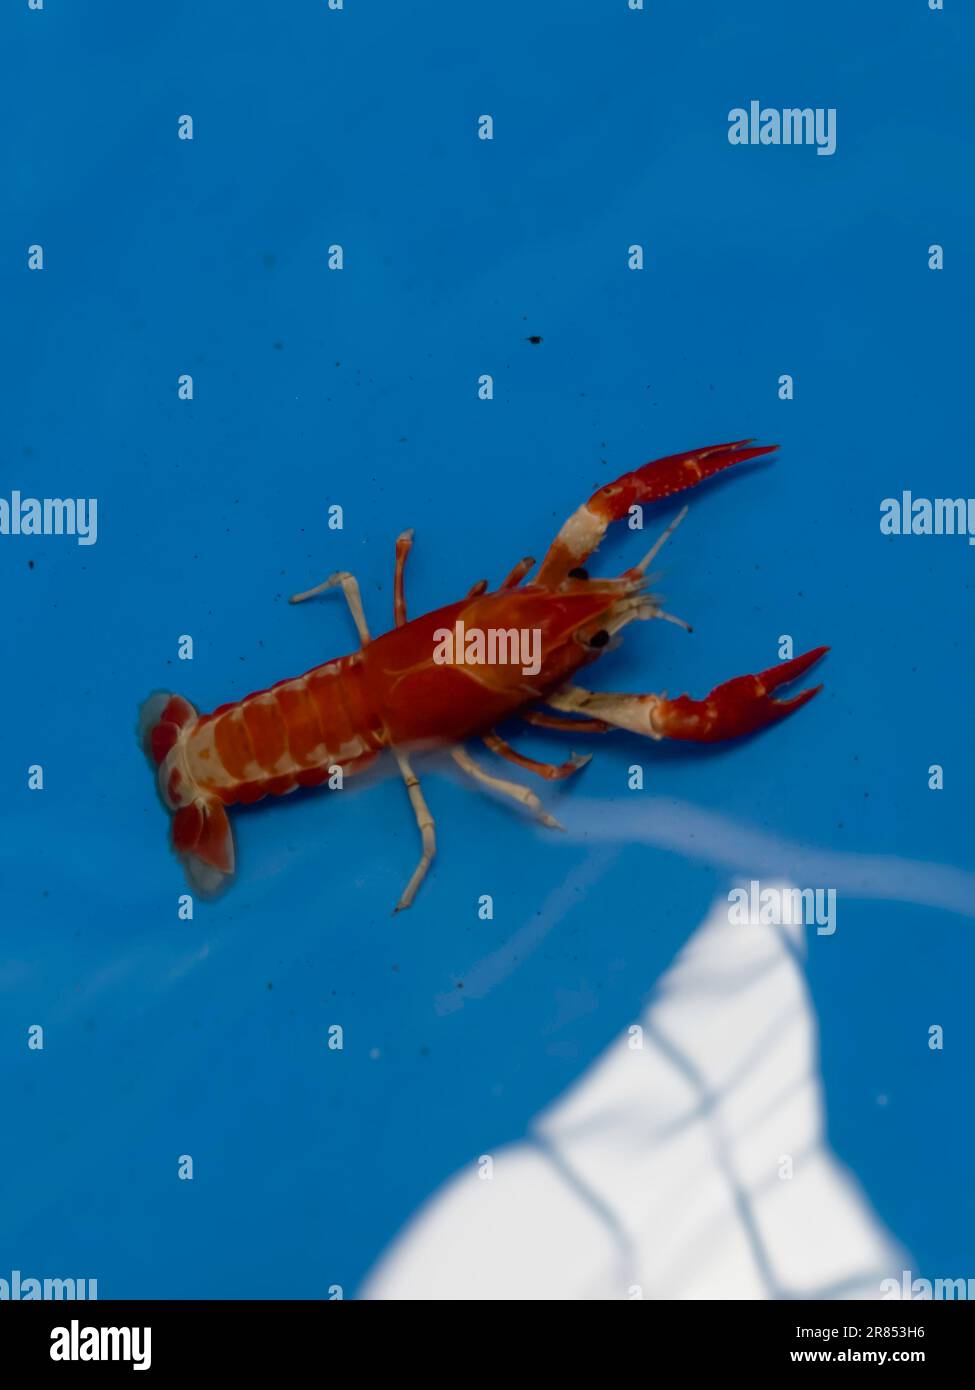 Cherry fire red dwarf shrimps stay on blue tank, stock photo Stock Photo